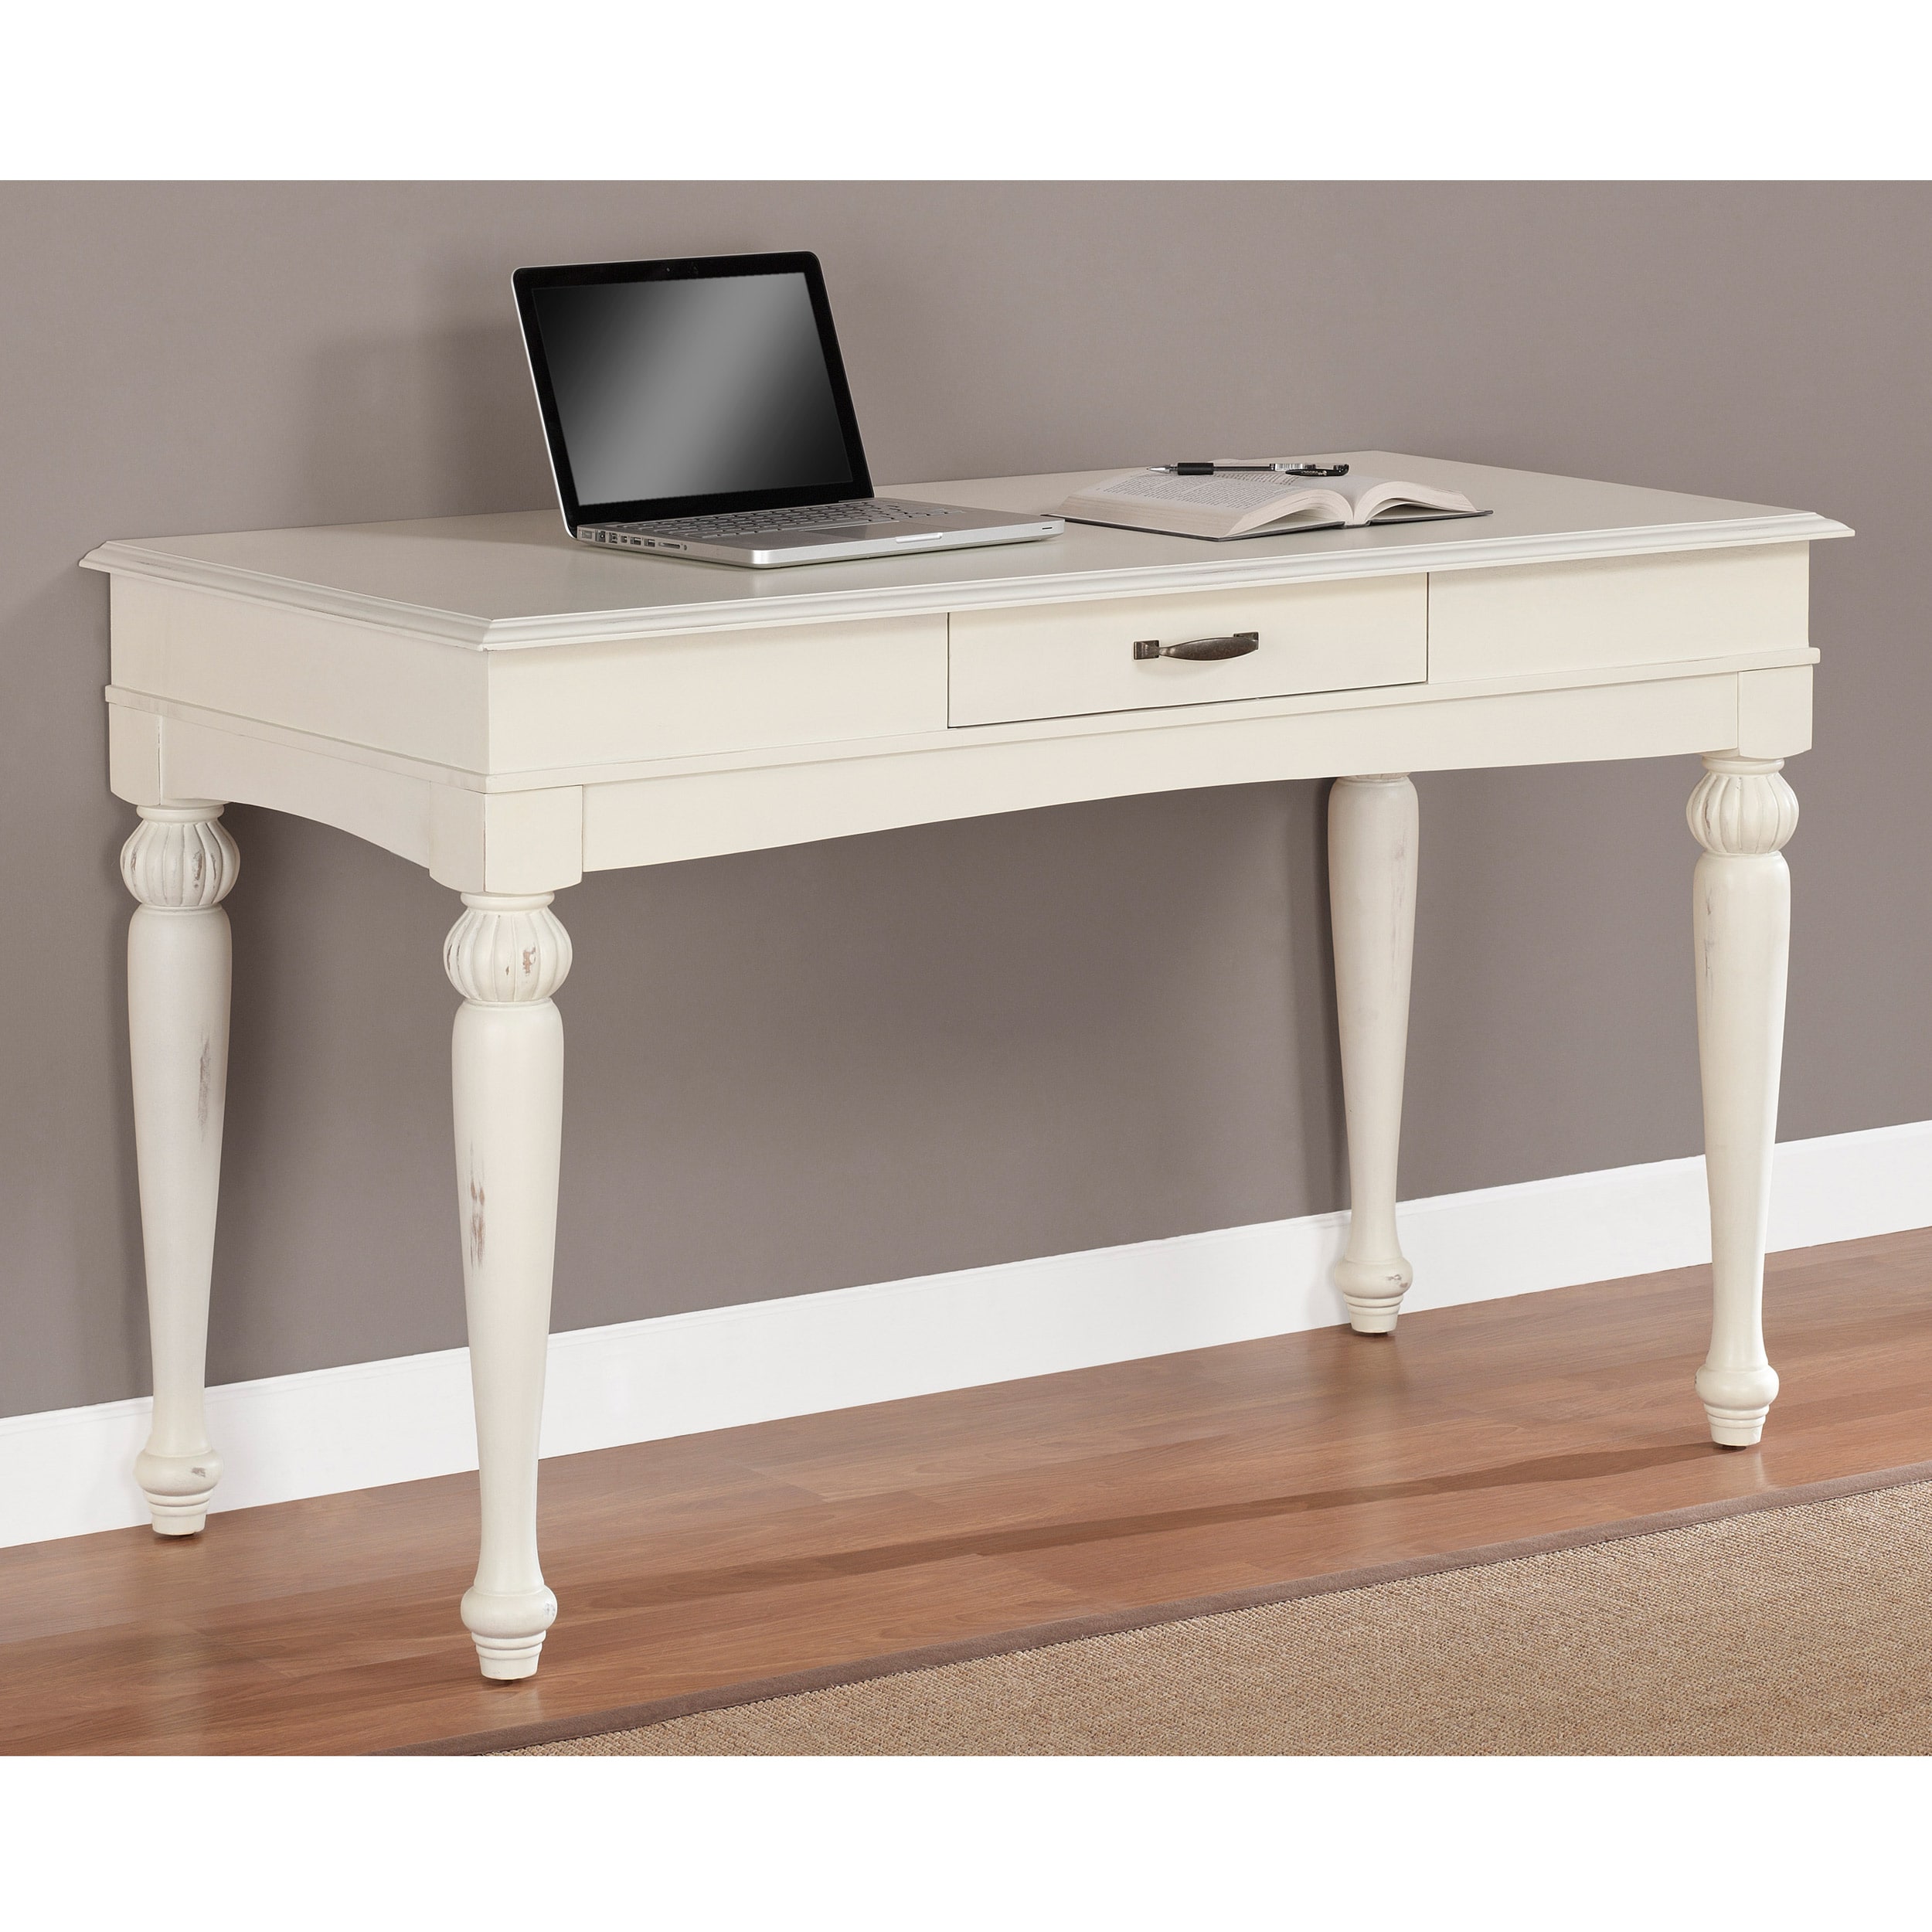 Shop Vanilla Wasatch Onedrawer Desk Free Shipping Today Overstock